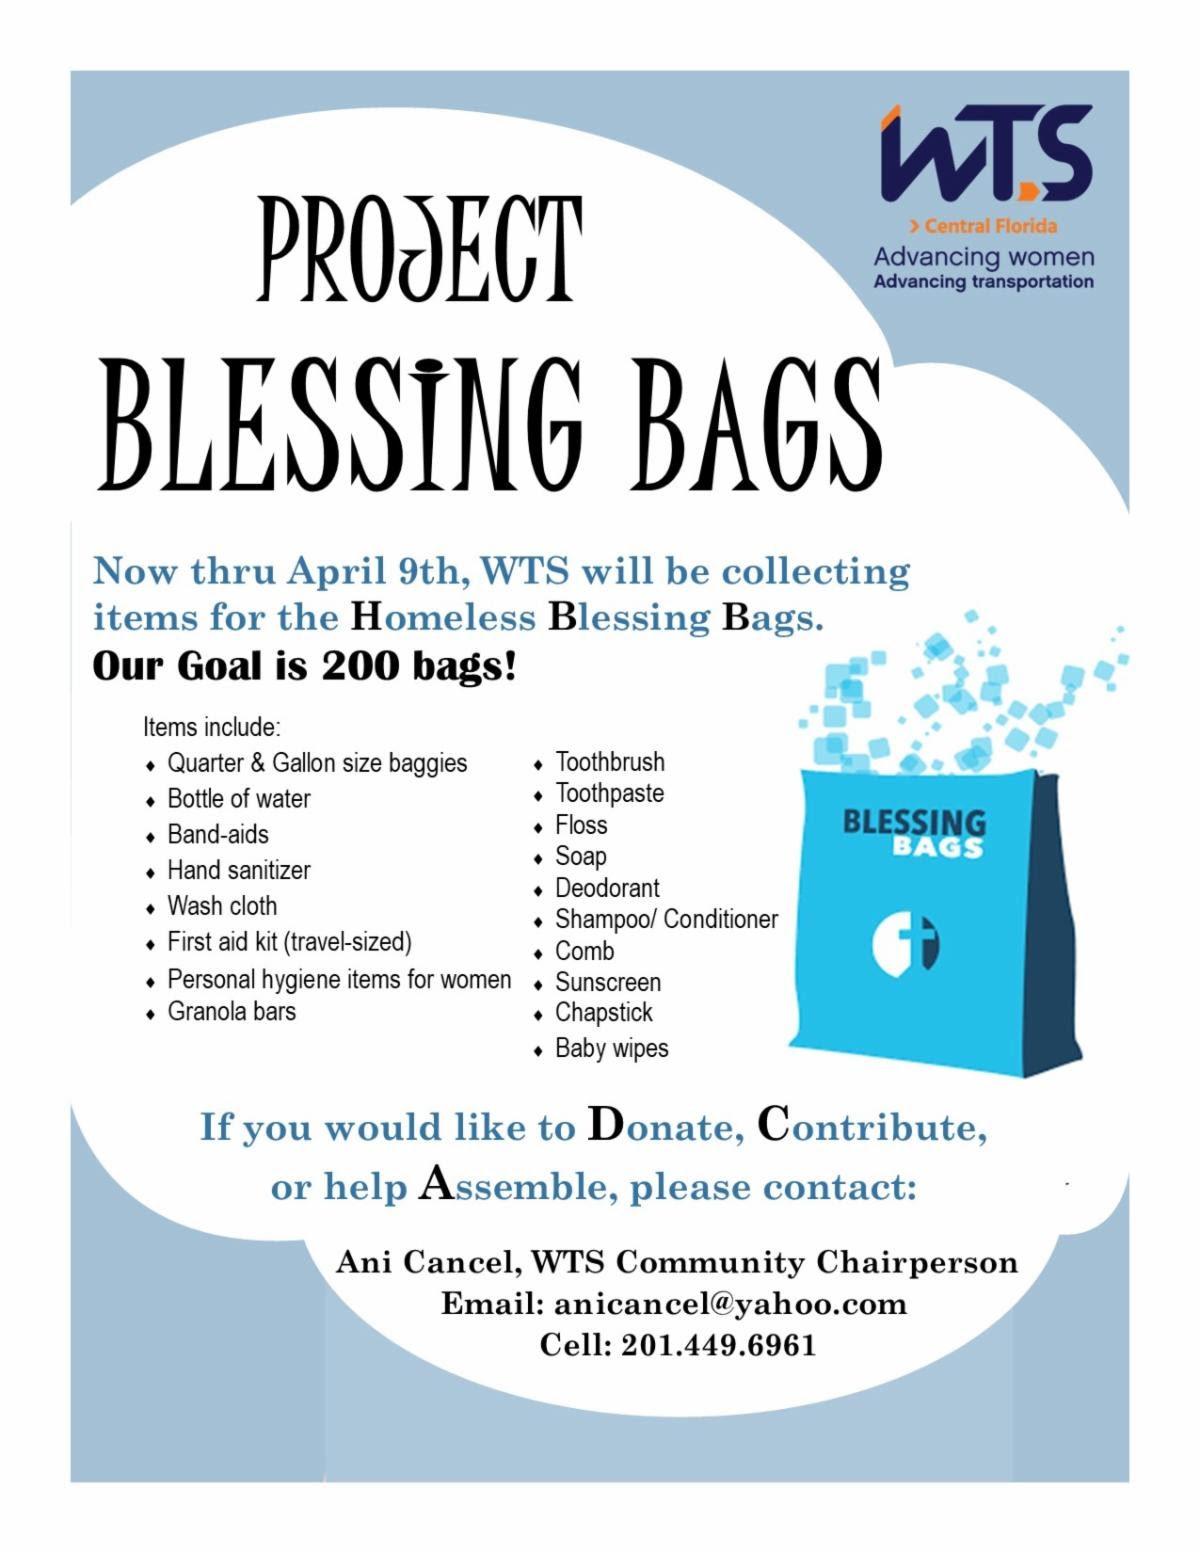 WTSCFL - Blessing Bags